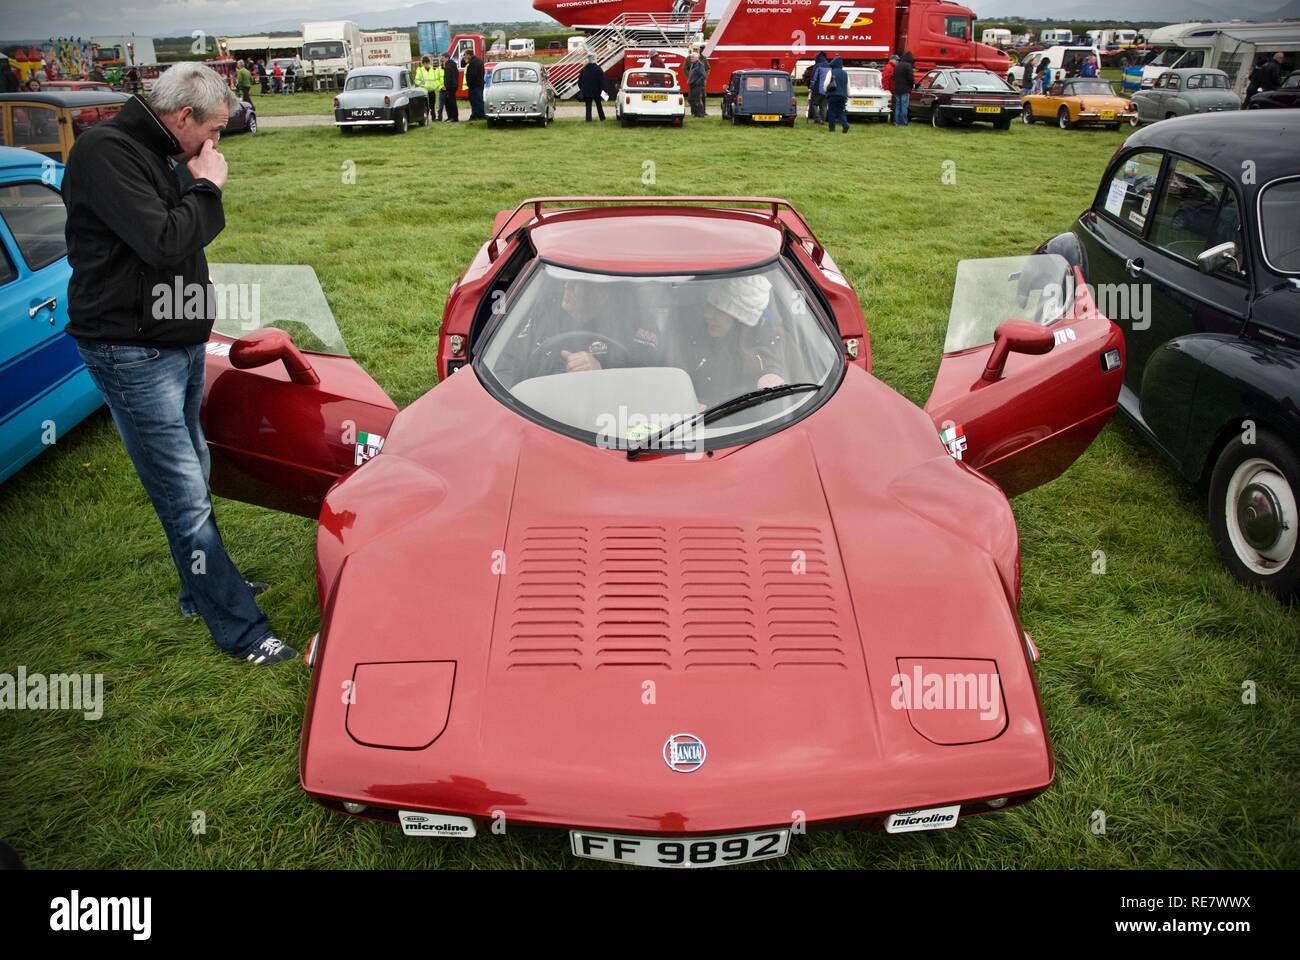 A CAE Corse, Lancia Stratos replica sports car at the Anglesey Vintage Rally, Anglesey, North Wales, UK, May 2015 Stock Photo